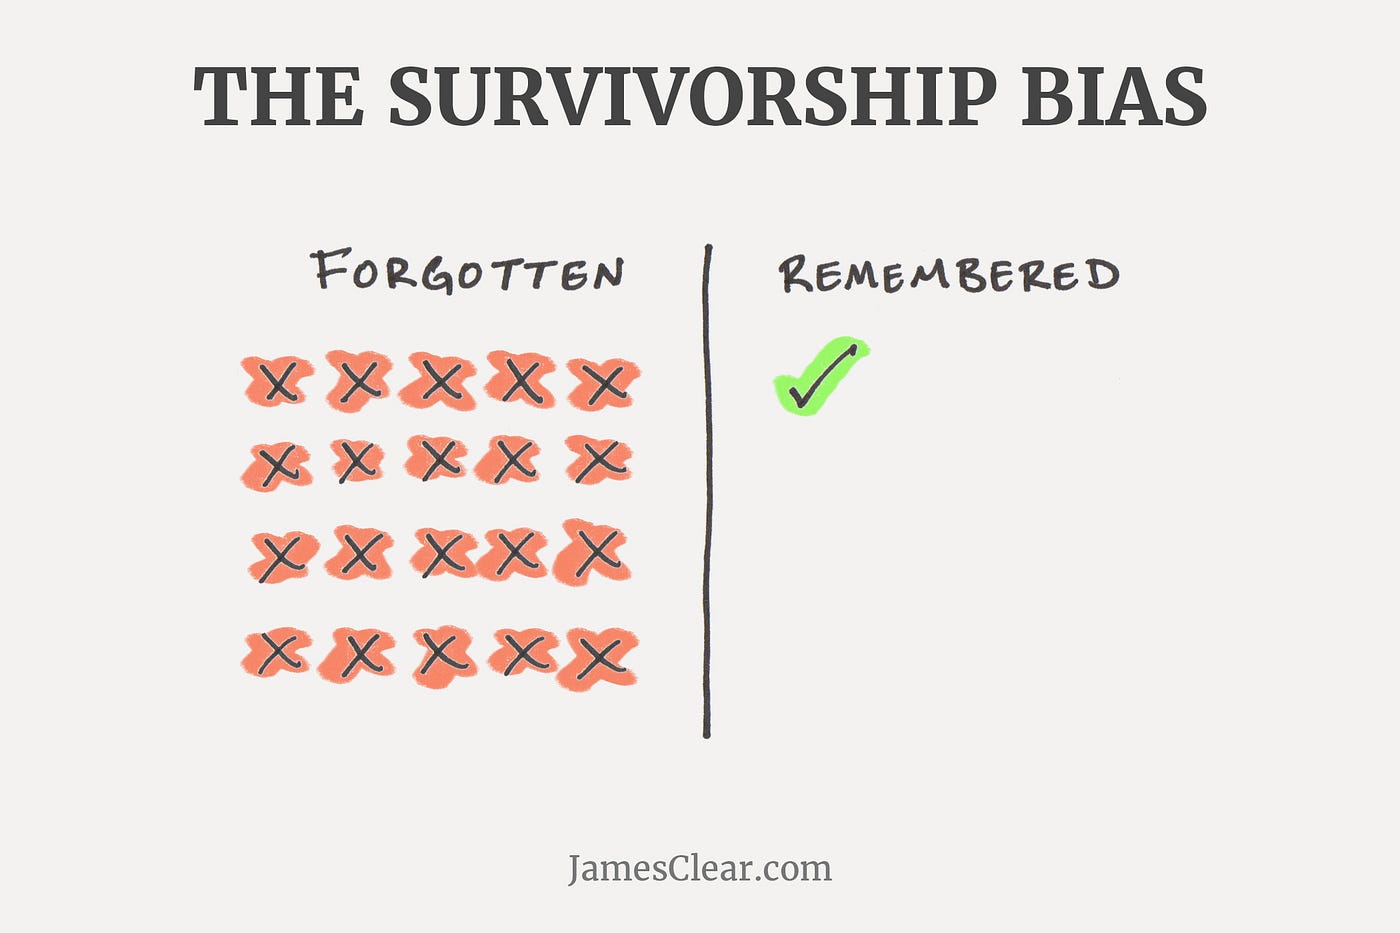 What Every Founder Needs to Know About Survivorship Bias